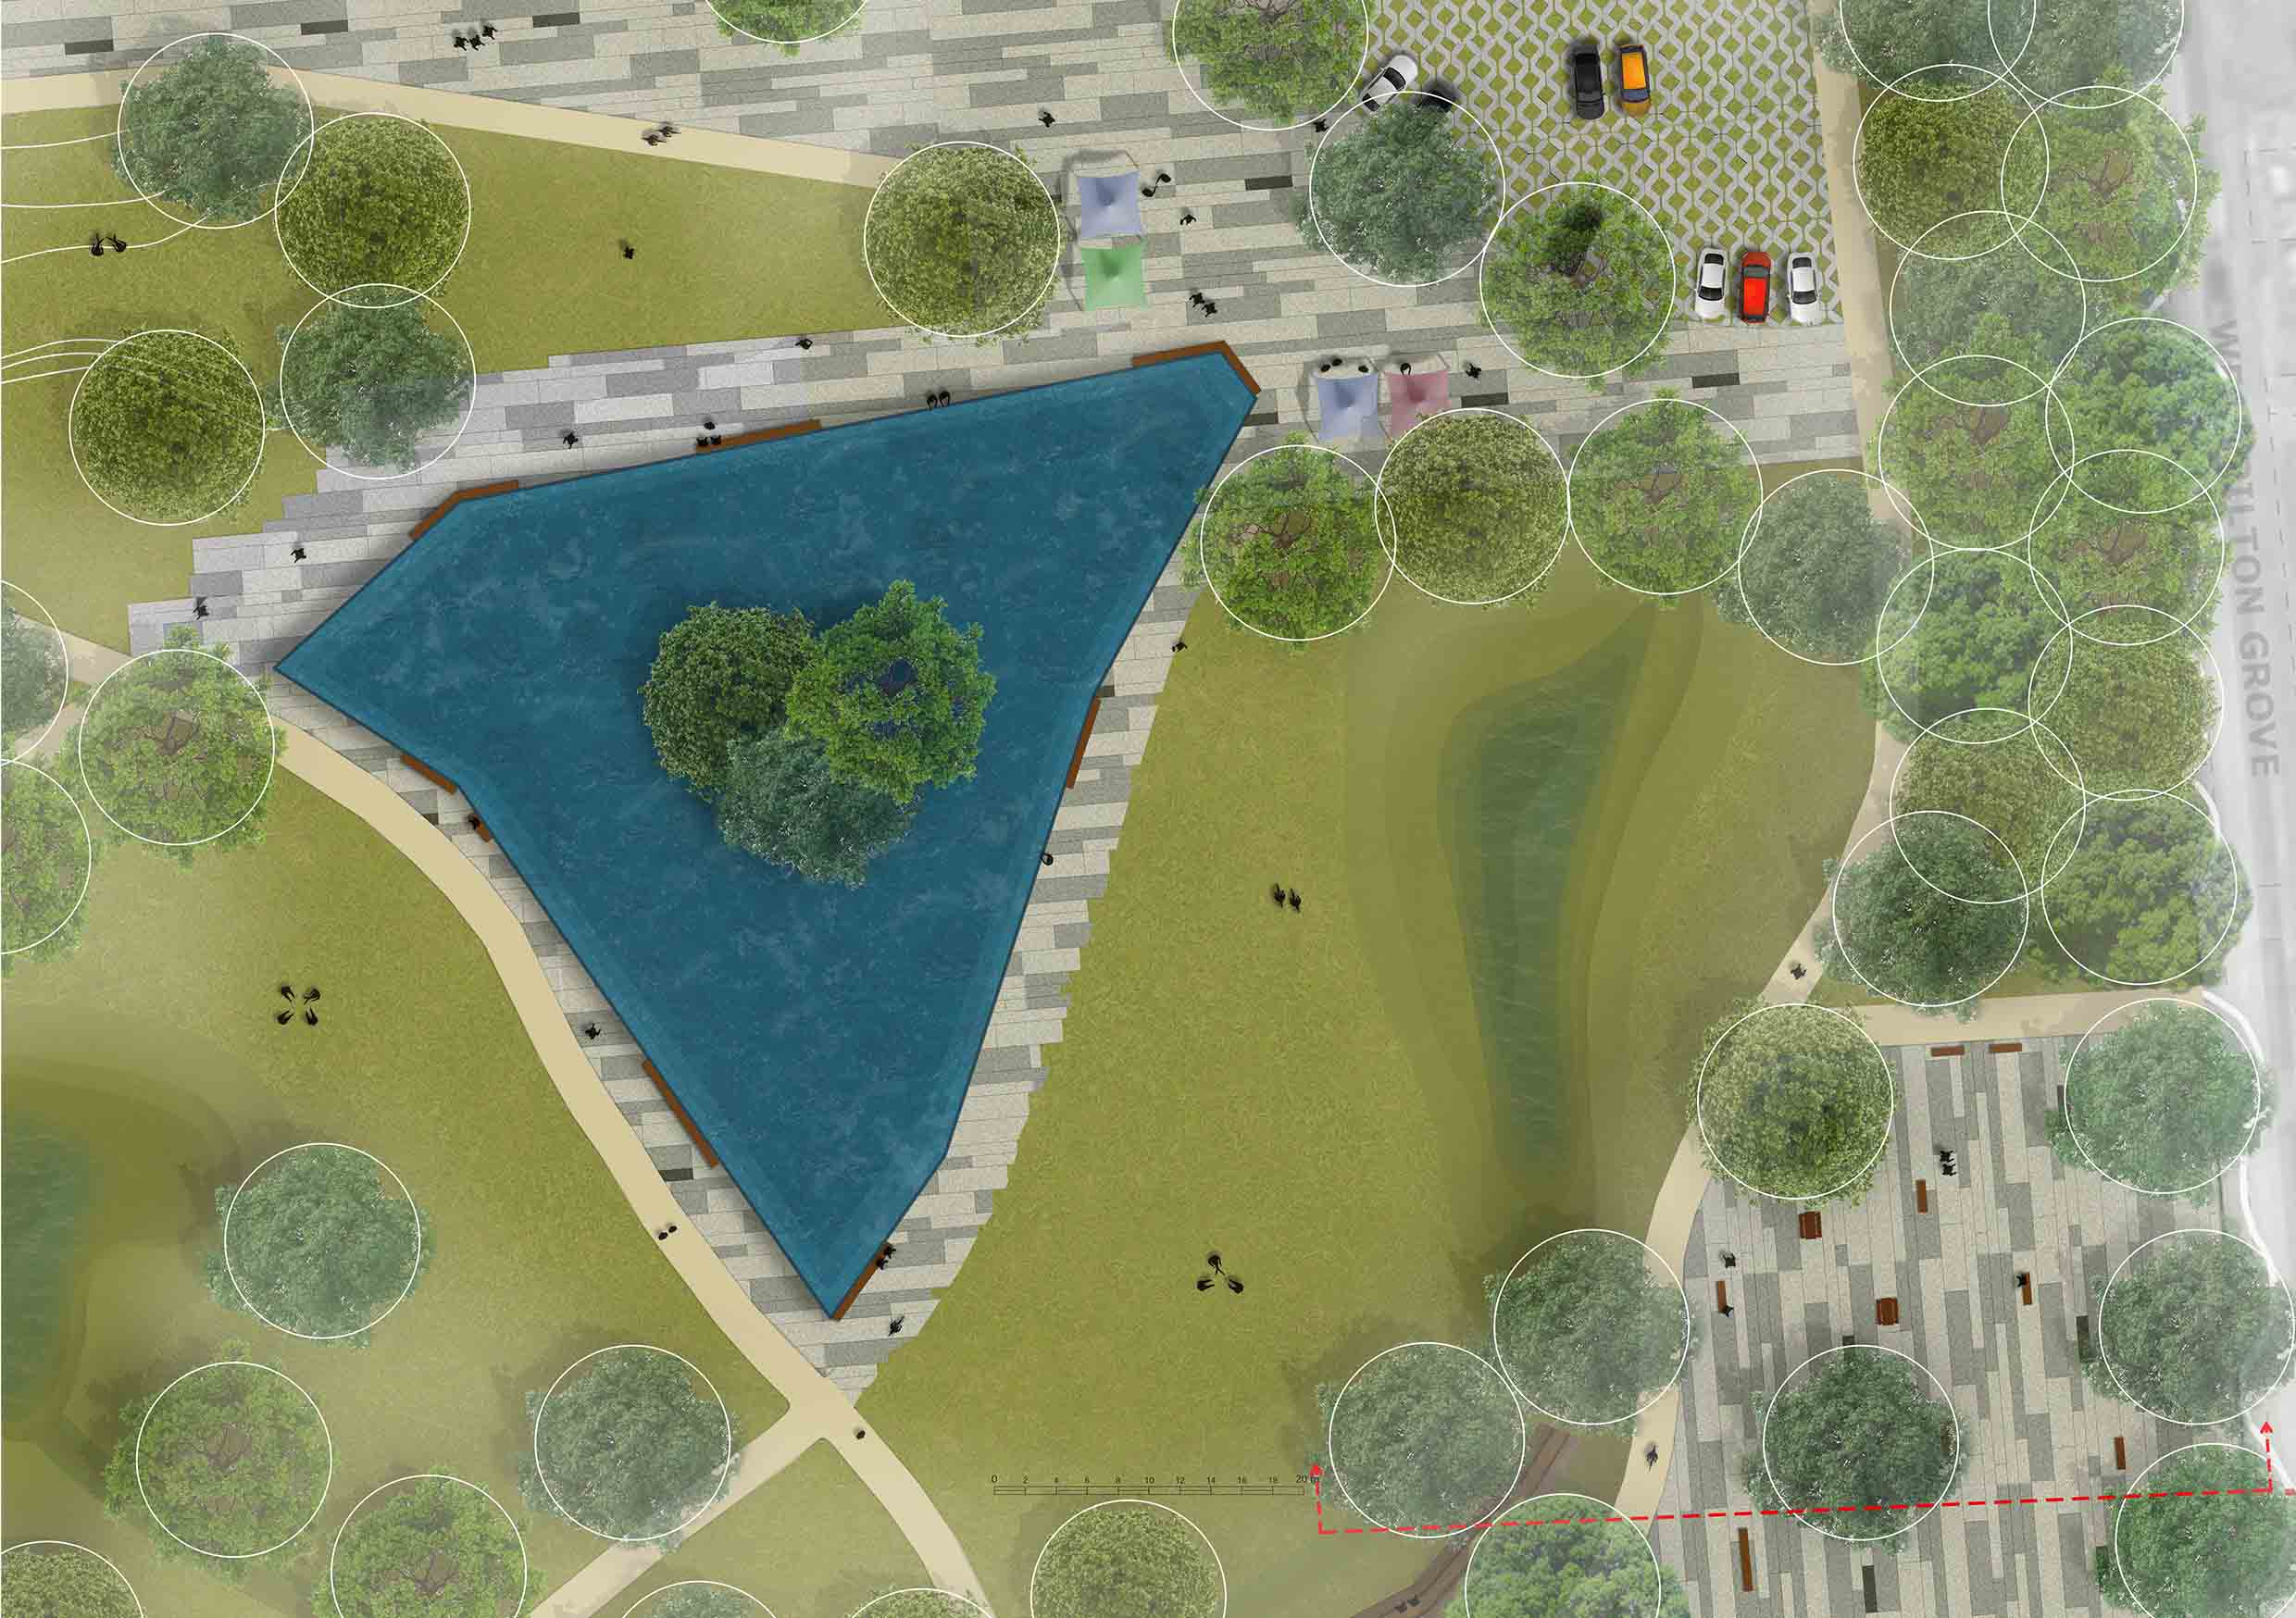 Plan view of the proposed water feature within West Pilton Park.